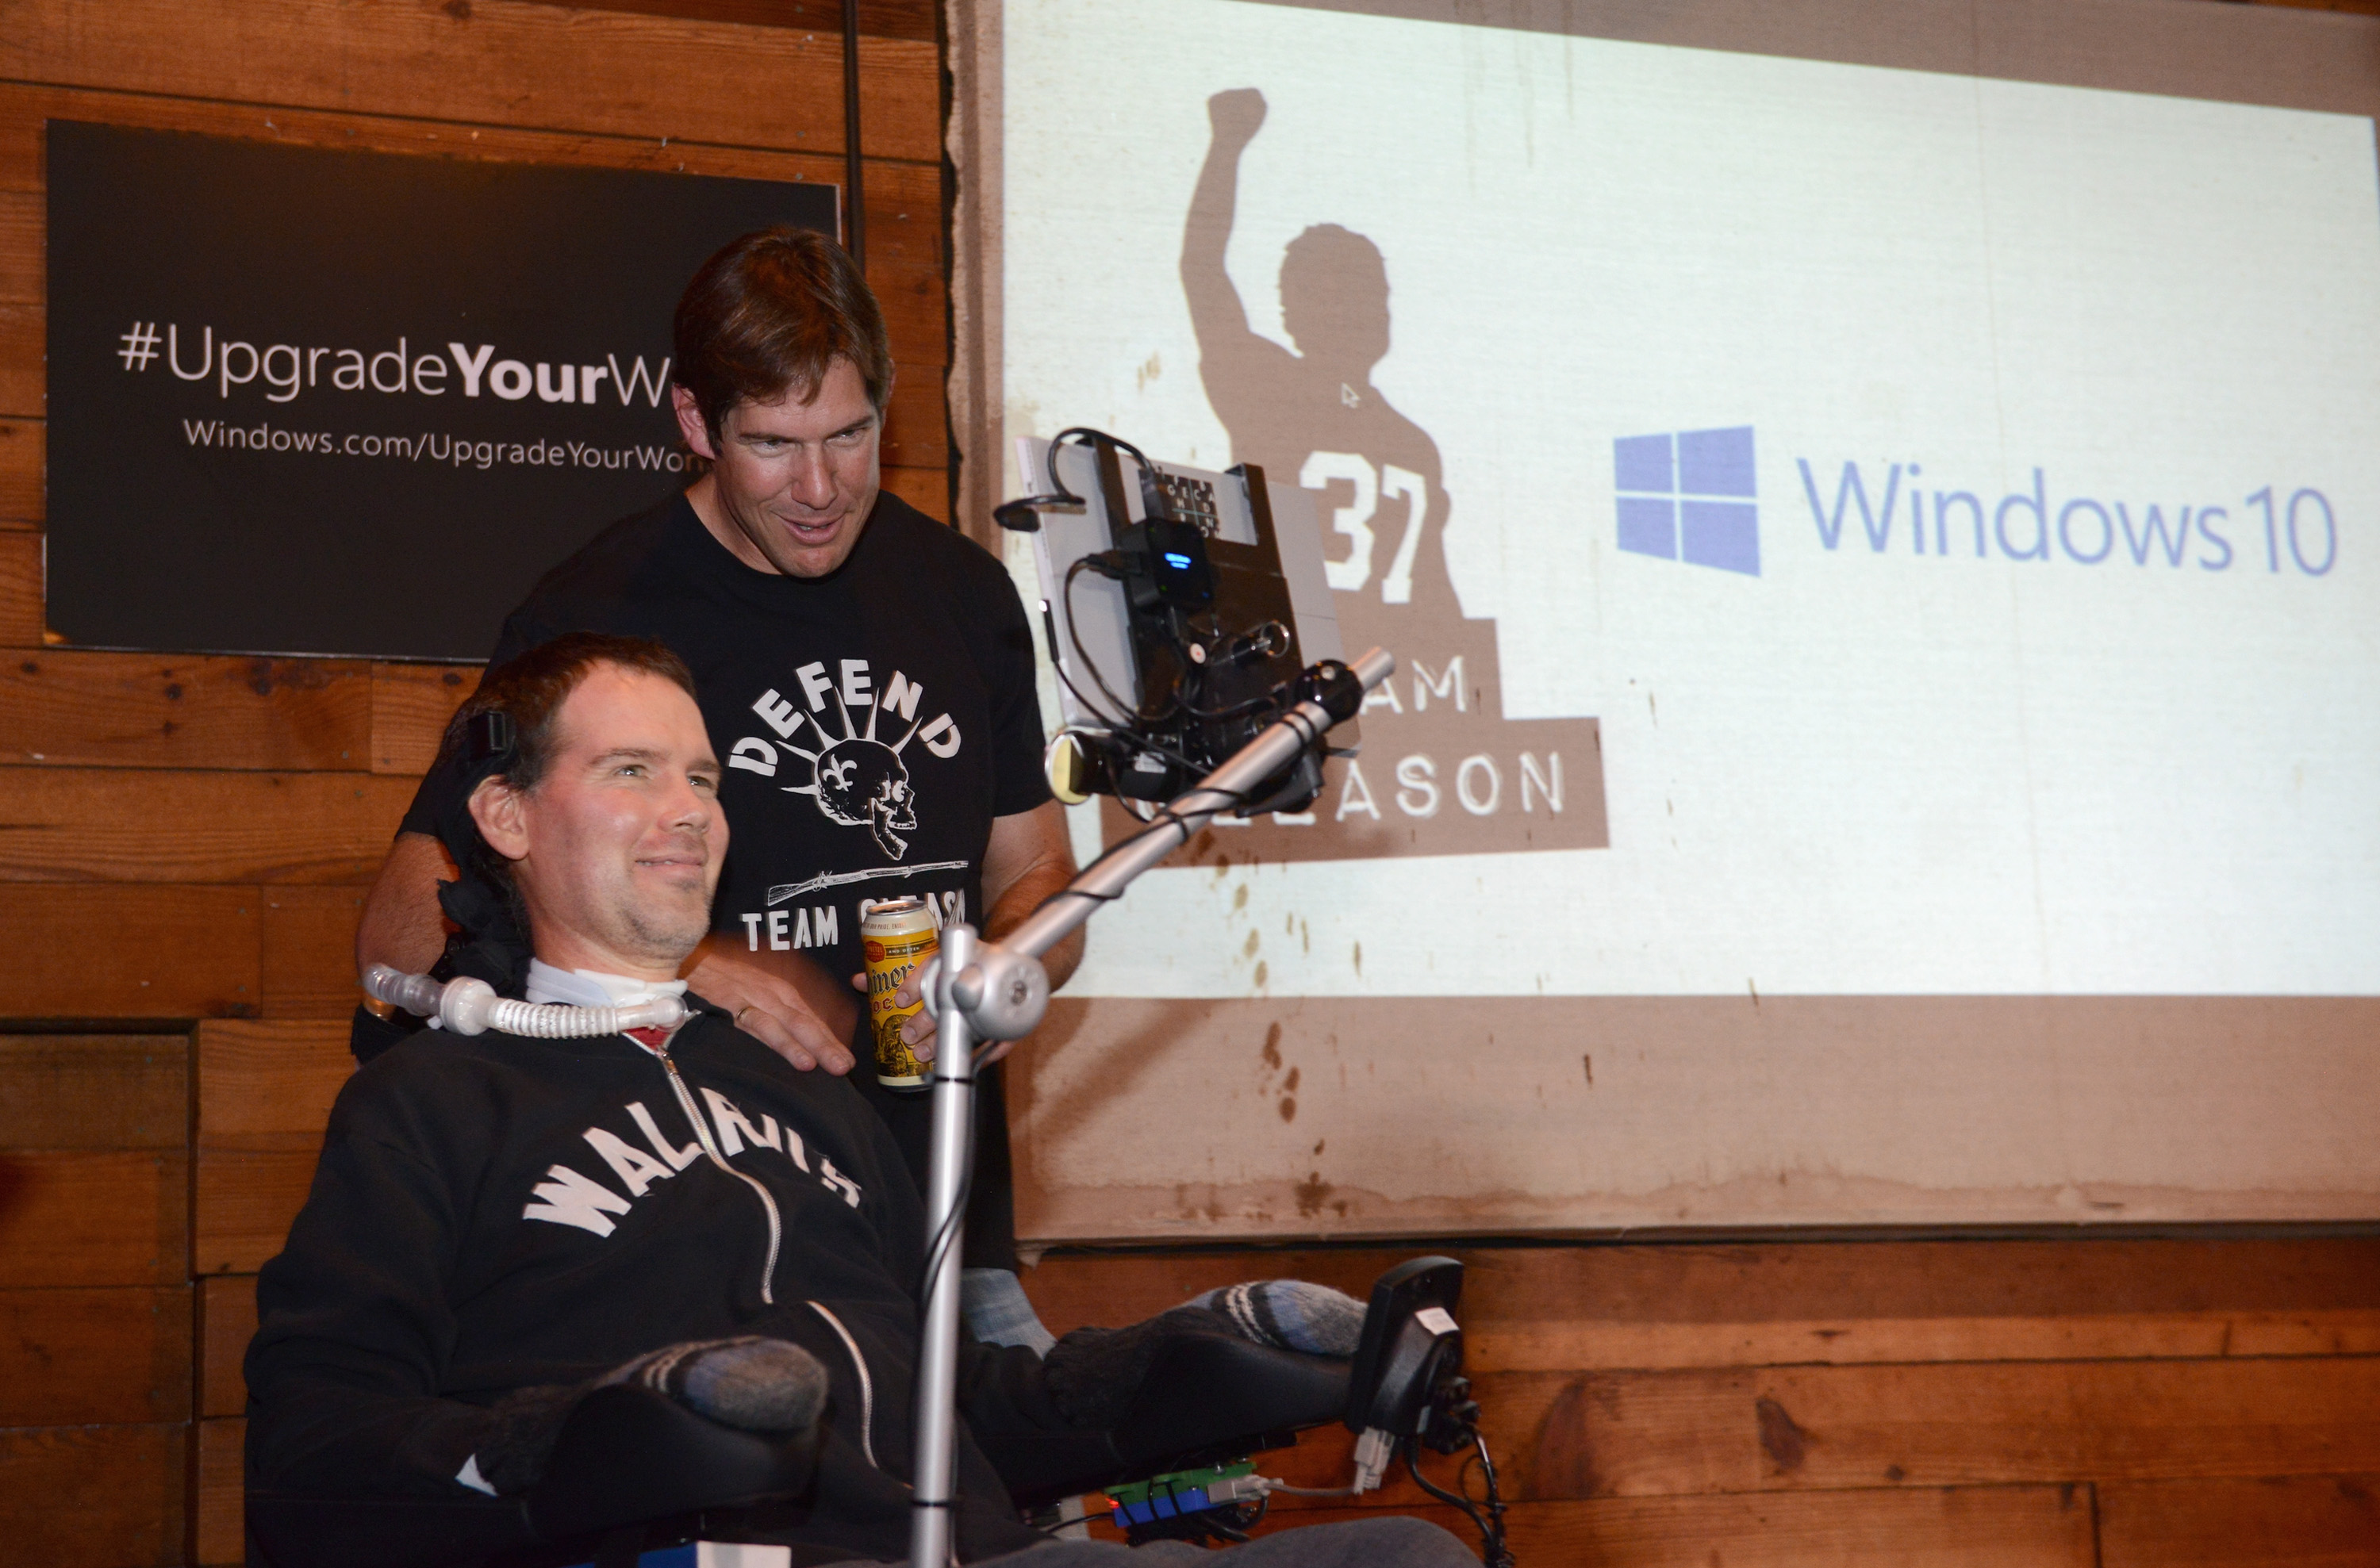 Windows 10 And Team Gleason Host Fireside Chat With Steve Gleason At SXSW